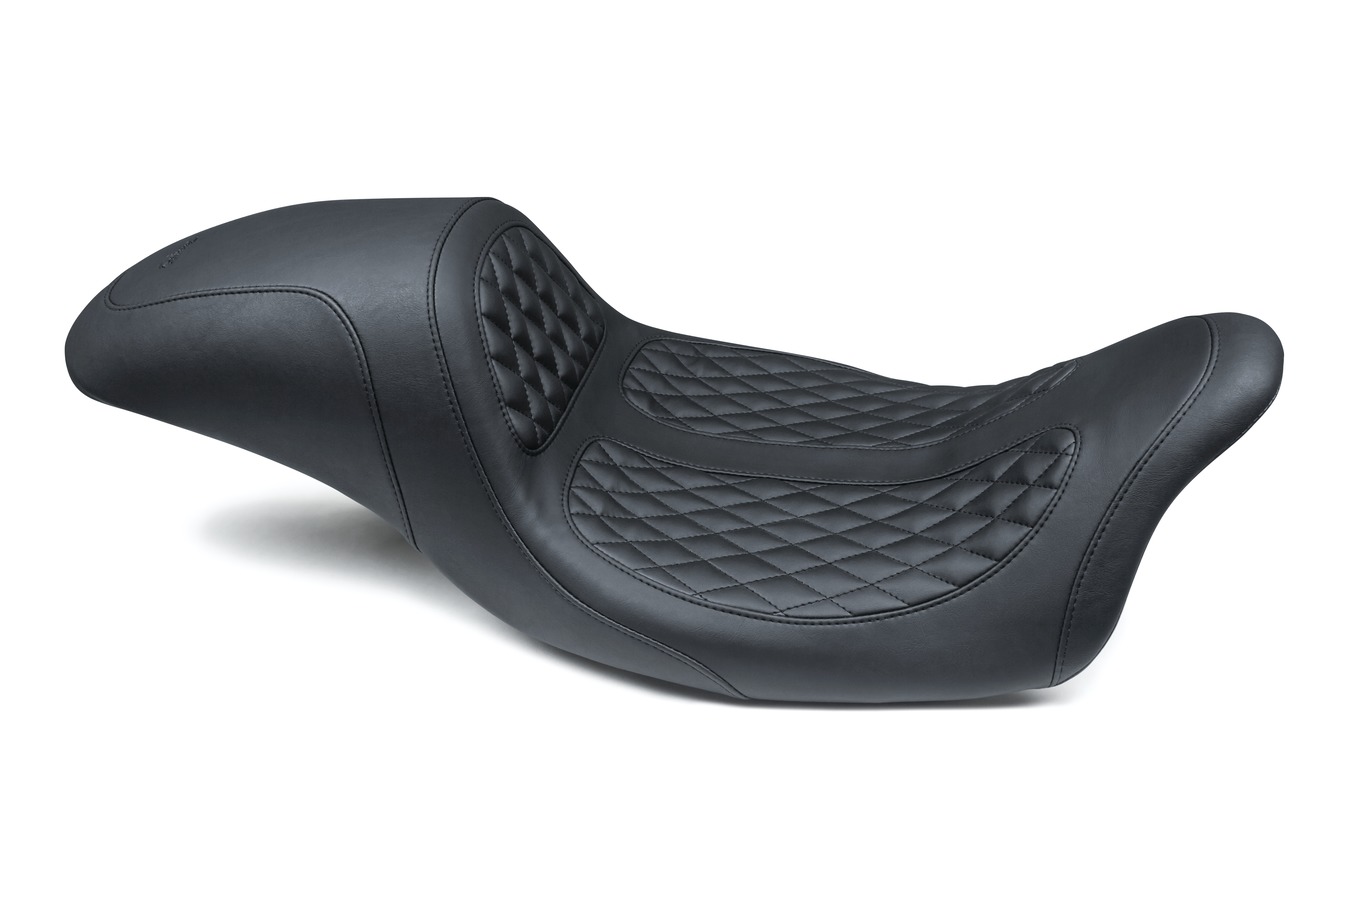 Signature Series Hightail Fastback™ One-Piece Seat by Dave Perewitz for Harley-Davidson Electra Glide Standard, Road Glide, Road King & Street Glide 2008-